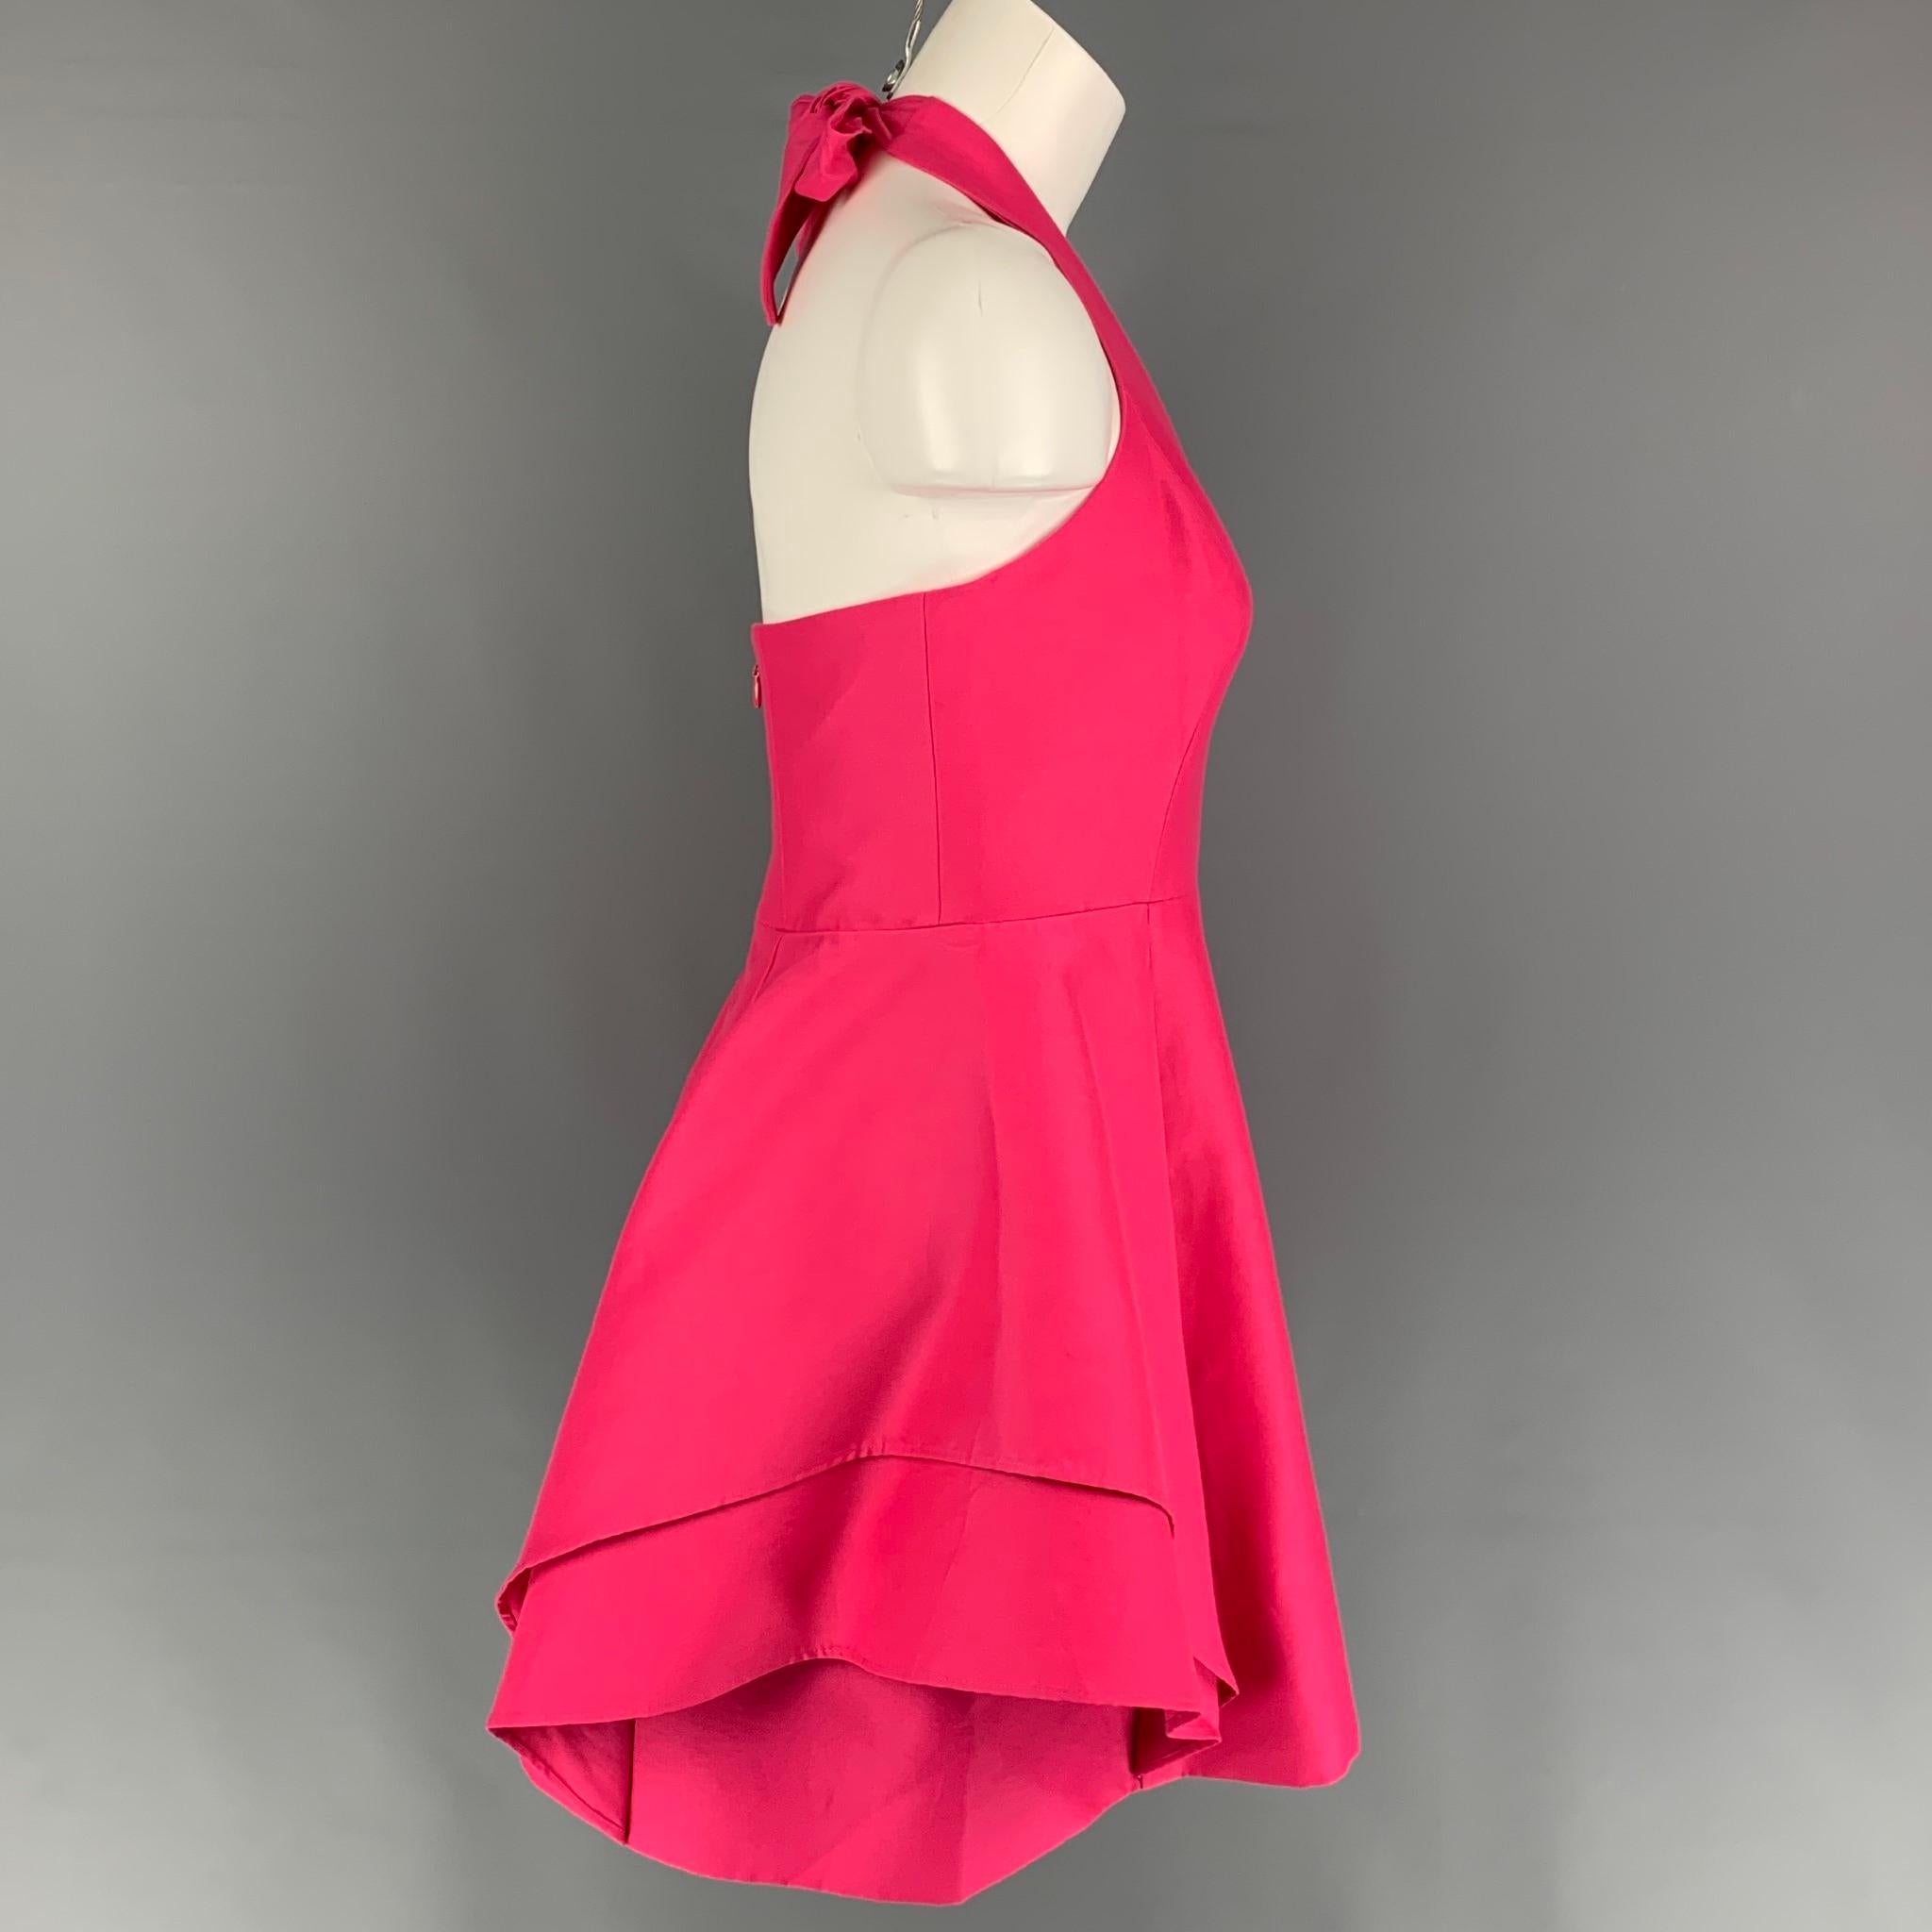 HALSTON HERITAGE dress comes in a pink cotton / silk featuring a pleated style, sleeveless, back zipper, and a top self-tie closure. 

Very Good Pre-Owned Condition.
Marked: 10
Original Retail Price: $450.00

Measurements:

Bust: 30 in.
Waist: 30